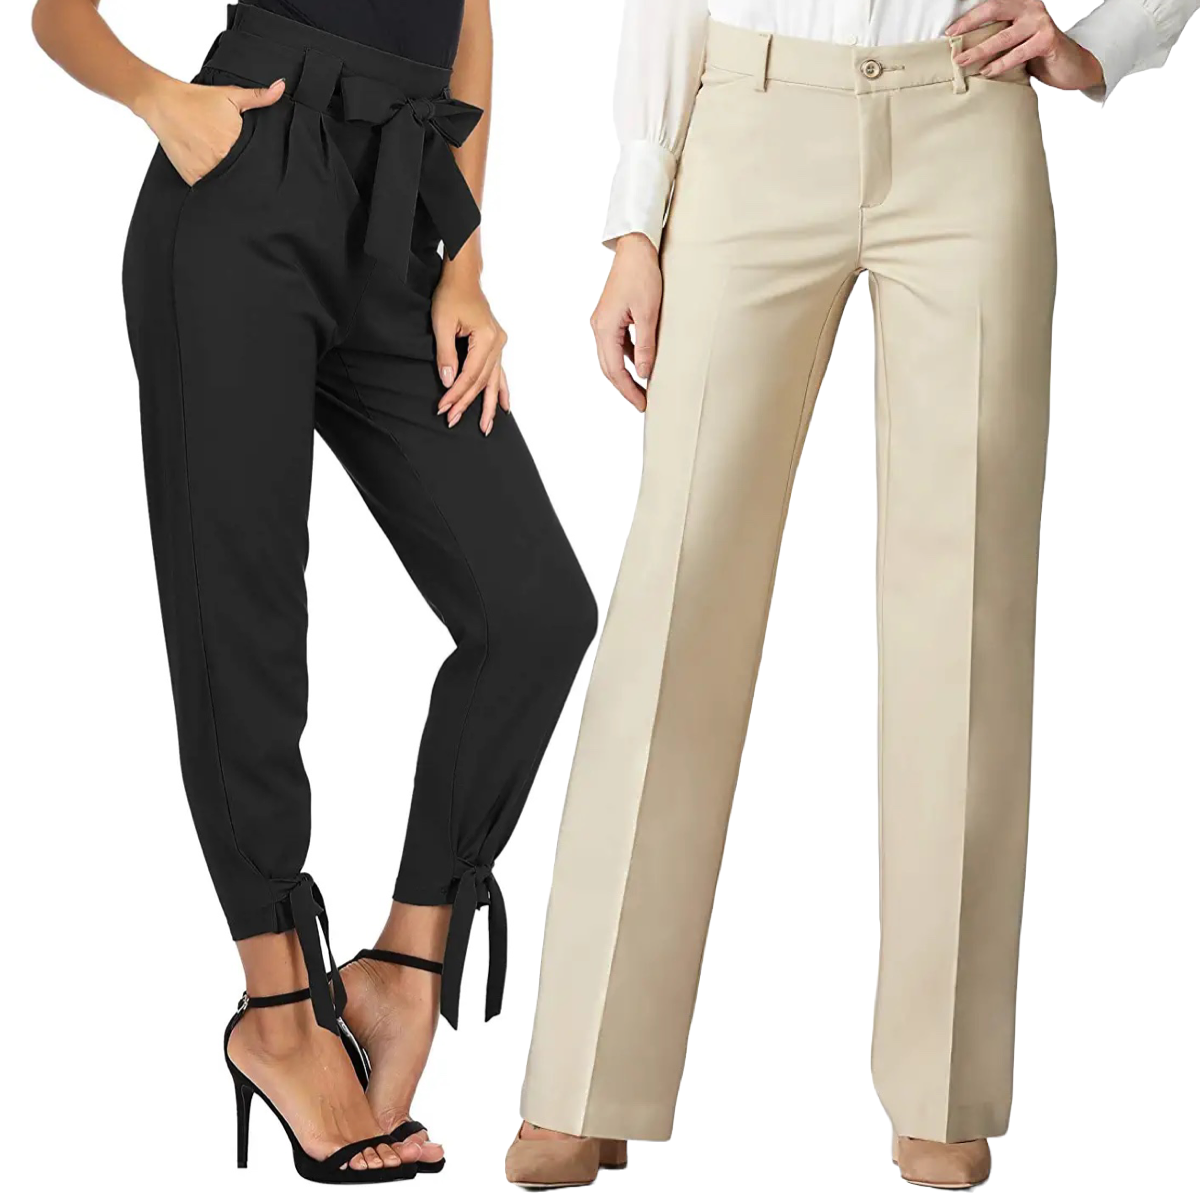 Trending Wholesale ladies office pants At Affordable Prices